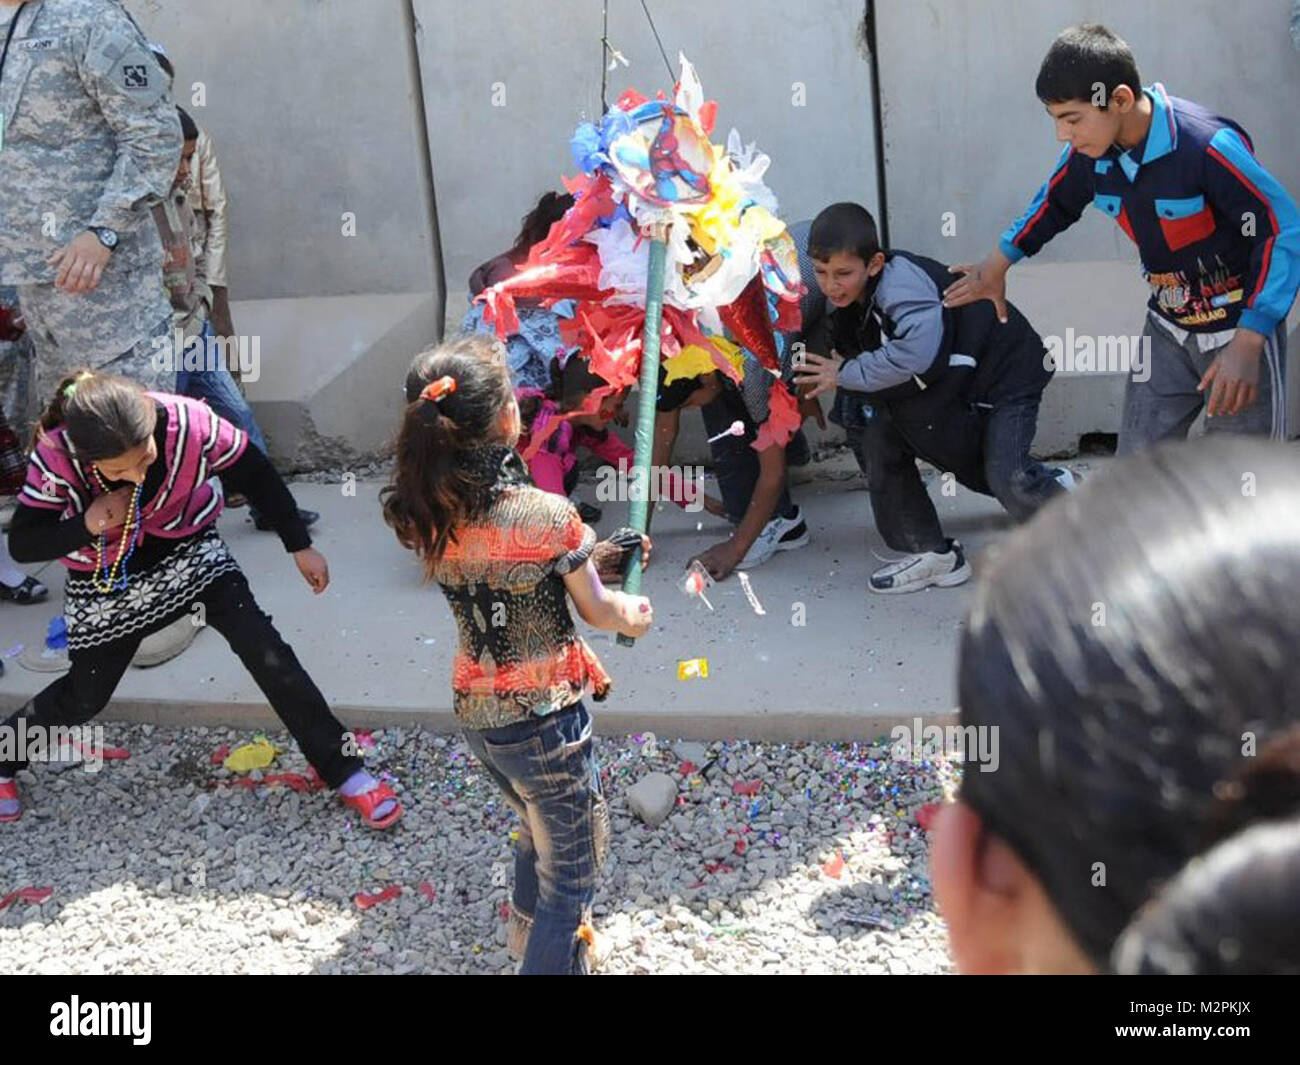 Smash and grab. JOINT BASE BALAD, Iraq – A local Iraqi girl breaks open a piñata during an Iraqi Kids Day, March 26, 2011, at Joint Base Balad, Iraq. Since the summer of 2010, units serving at Joint Base Balad have hosted Kids Day. Hosted by U.S. Soldiers of 2nd Brigade, 25th Infantry Division, approximately 100 Iraqi children participated in the day’s events, to include rappel rides, face painting, sport activities, and a piñata filled with candy and toys.  (U.S. Army photo by Staff Sgt. Ricardo Branch, 2nd AAB PAO, 25th Inf. Div., USD-N) Smash and grab by United States Forces - Iraq (Inactiv Stock Photo